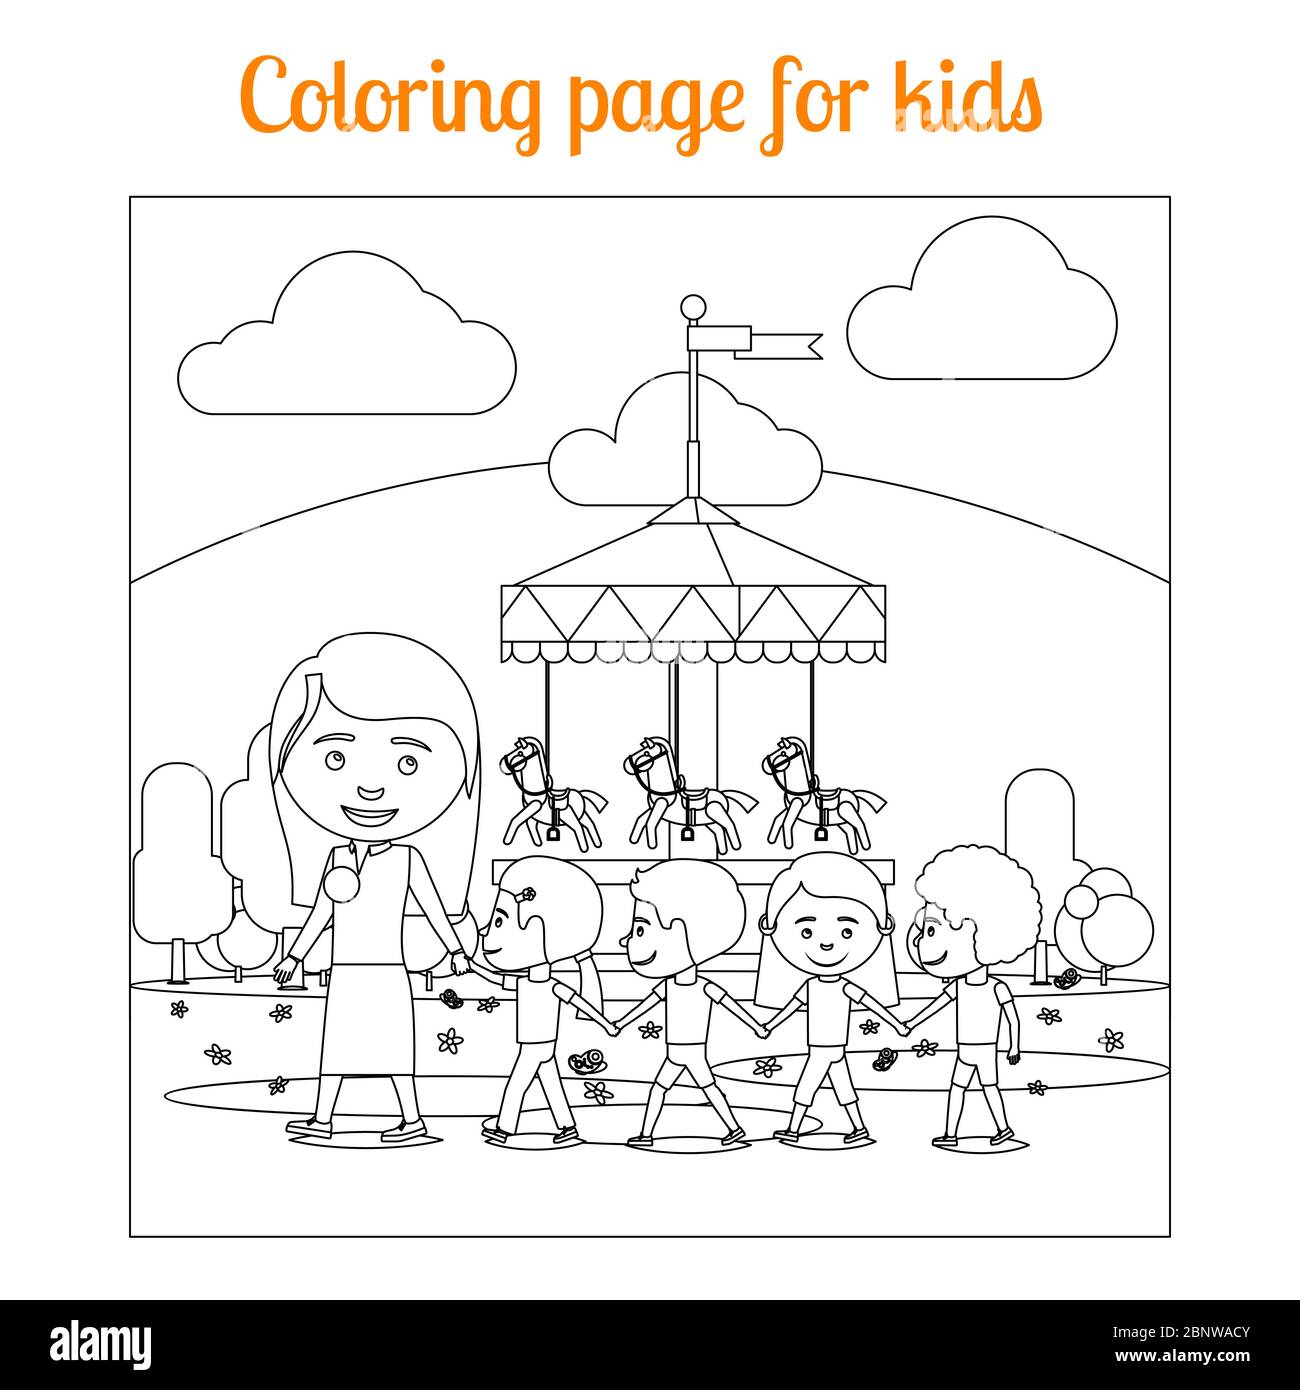 Coloring book page for kids with amusement park. vector illustration Stock Vector